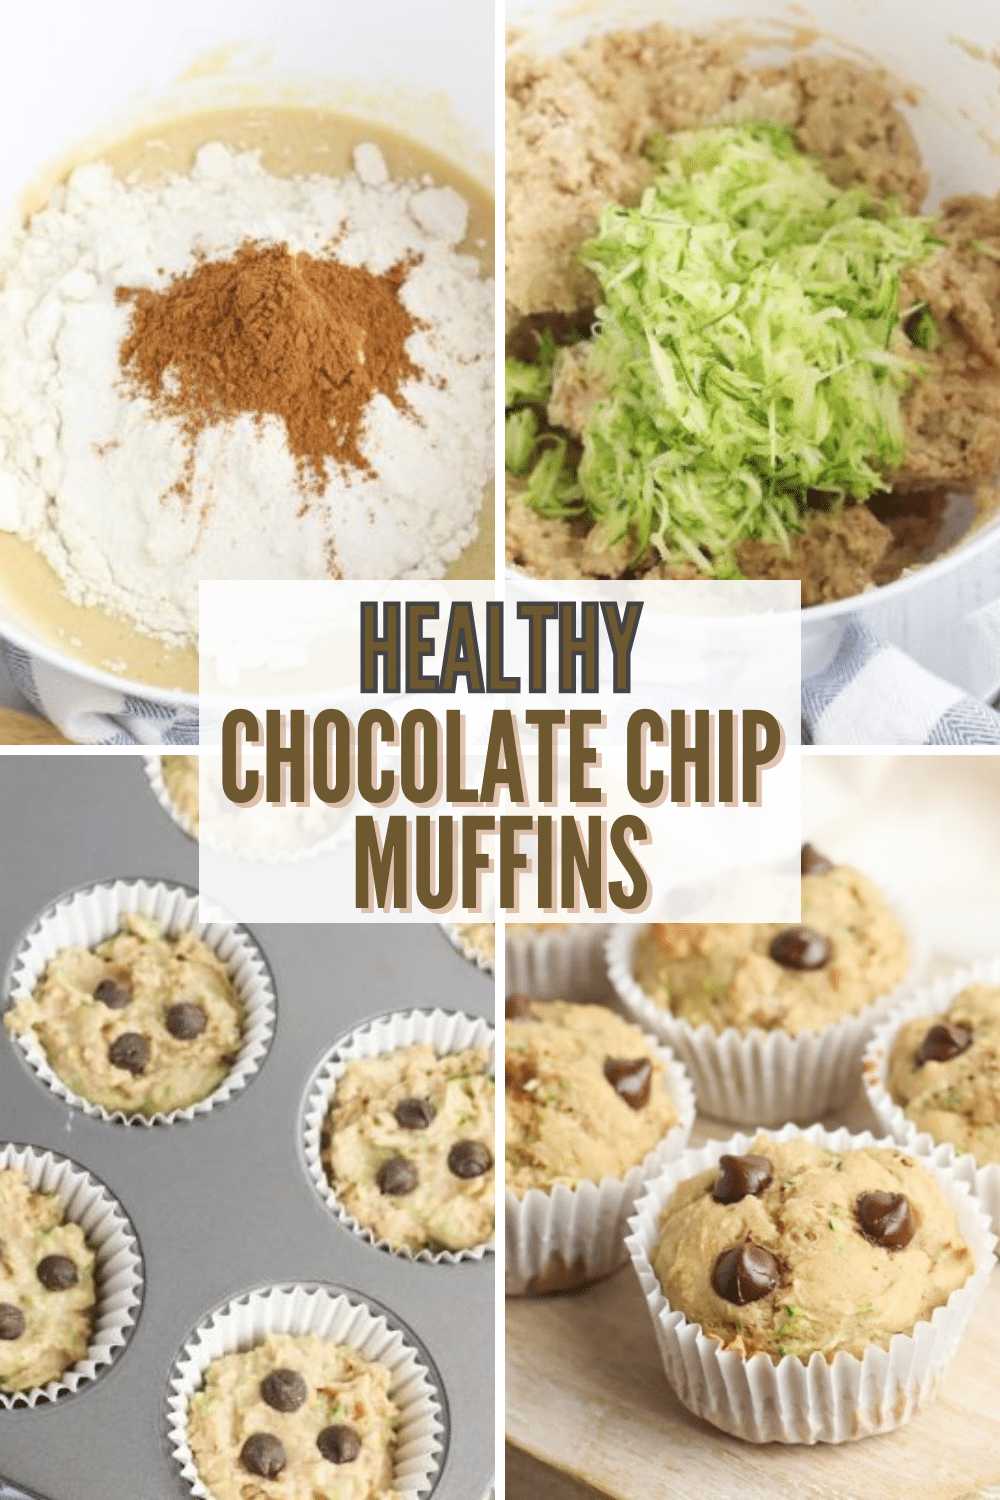 These healthy chocolate chip muffins are made with shredded zucchini and applesauce so they are moist and delicious with the perfect amount of sweetness. #muffins #healthyrecipes #zucchini via @wondermomwannab